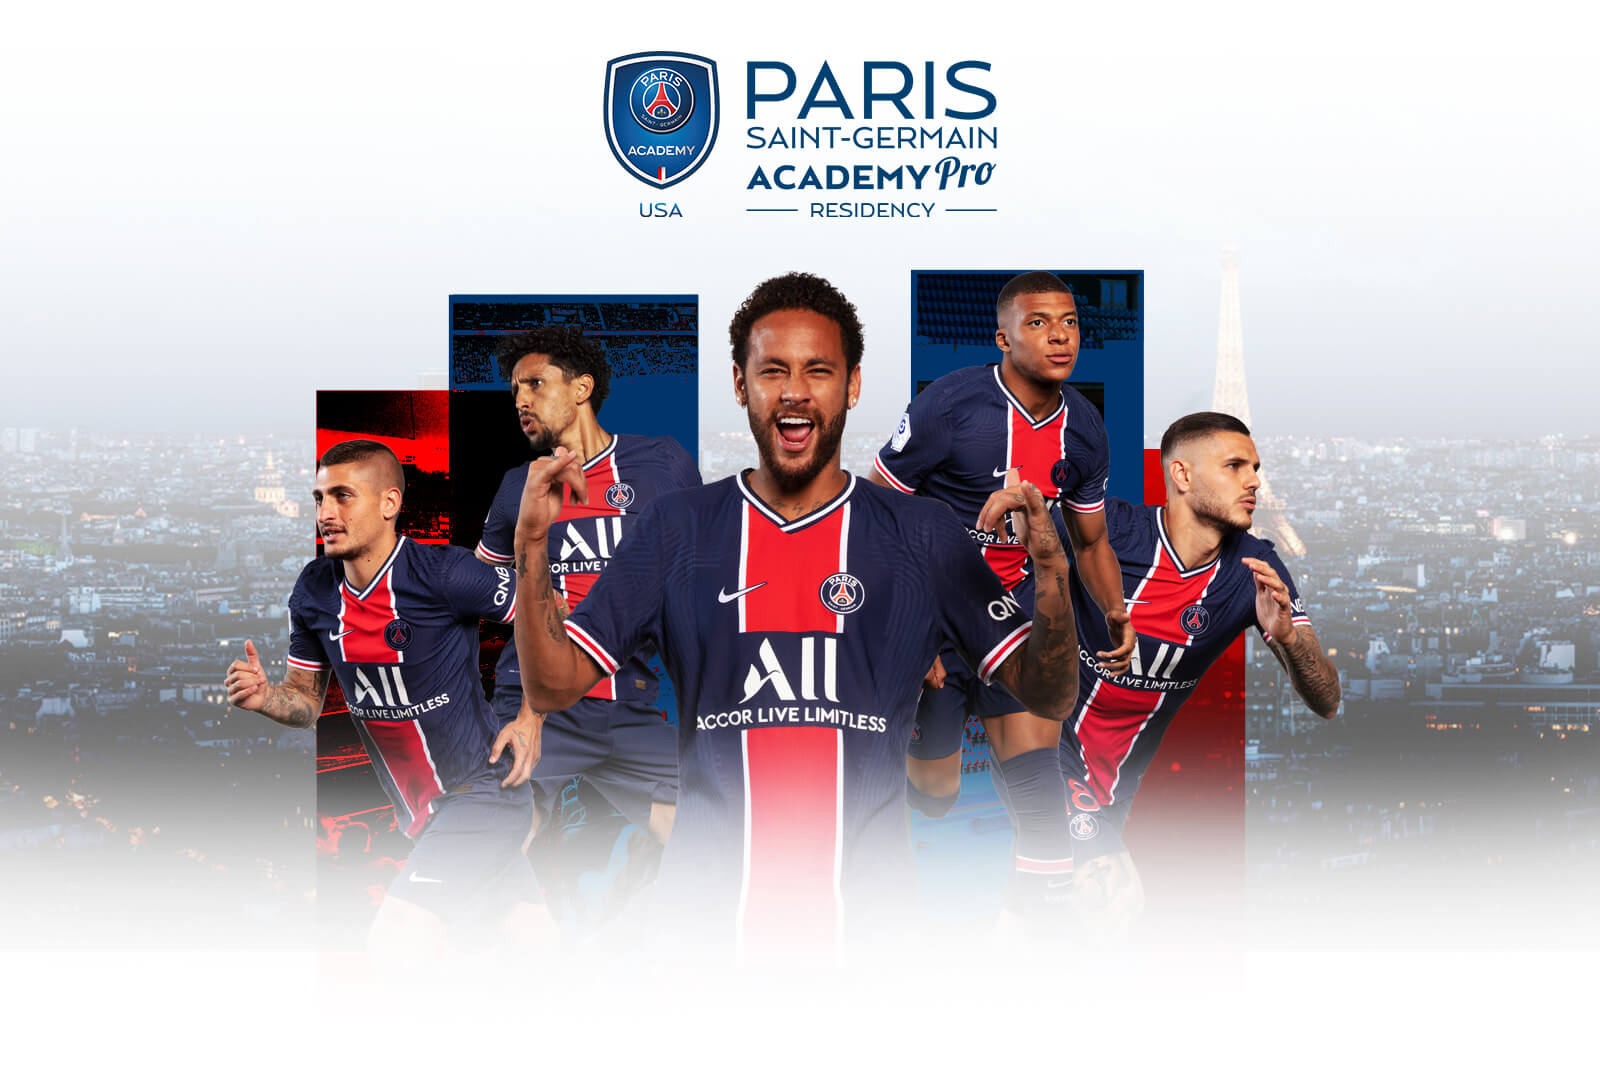 Kick off of the world’s first and only Paris SaintGermain Academy Pro